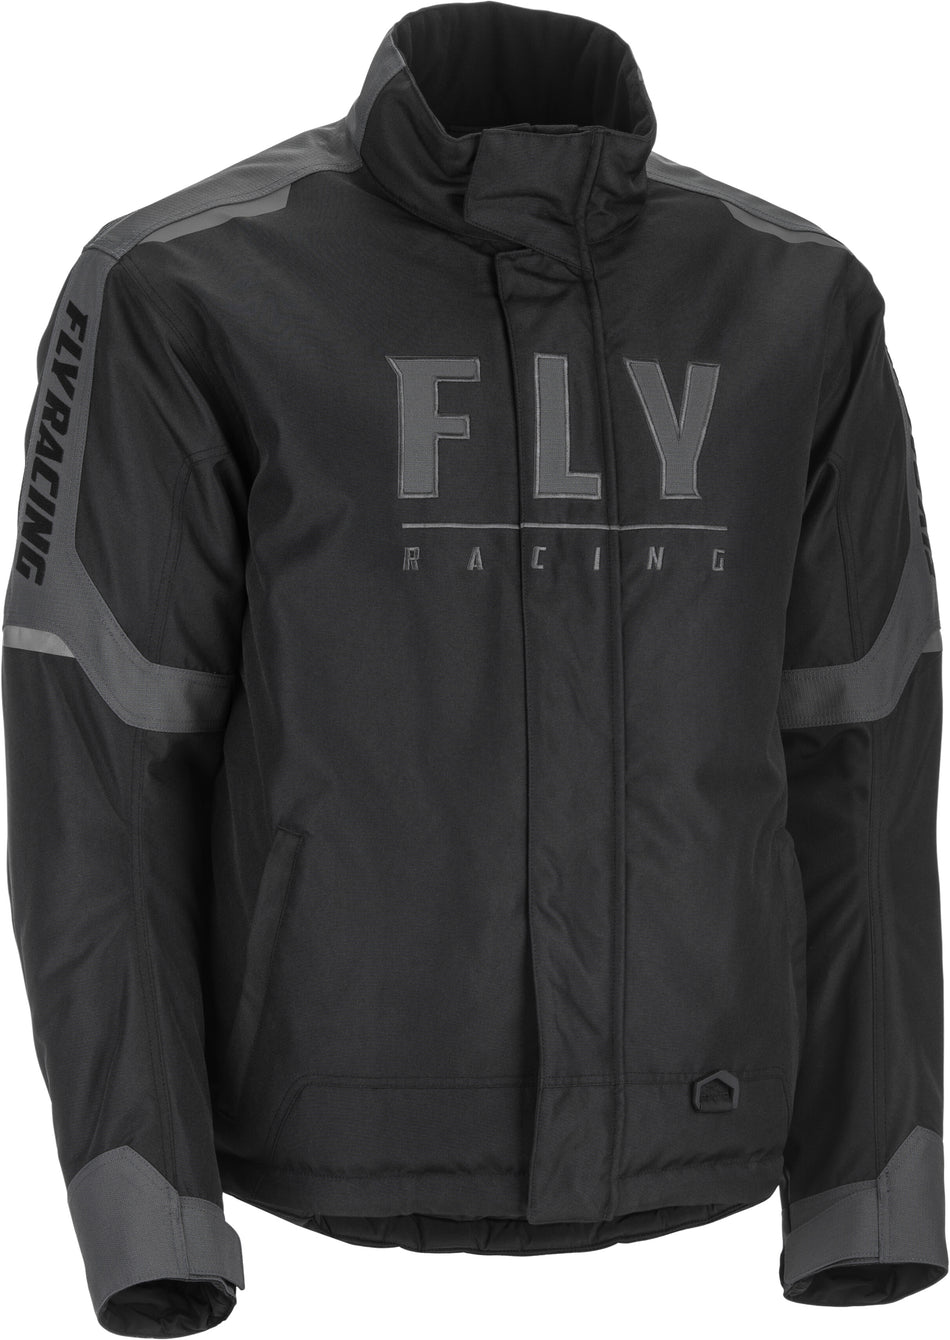 FLY RACING Outpost Jacket Black/Grey Md 470-4140M